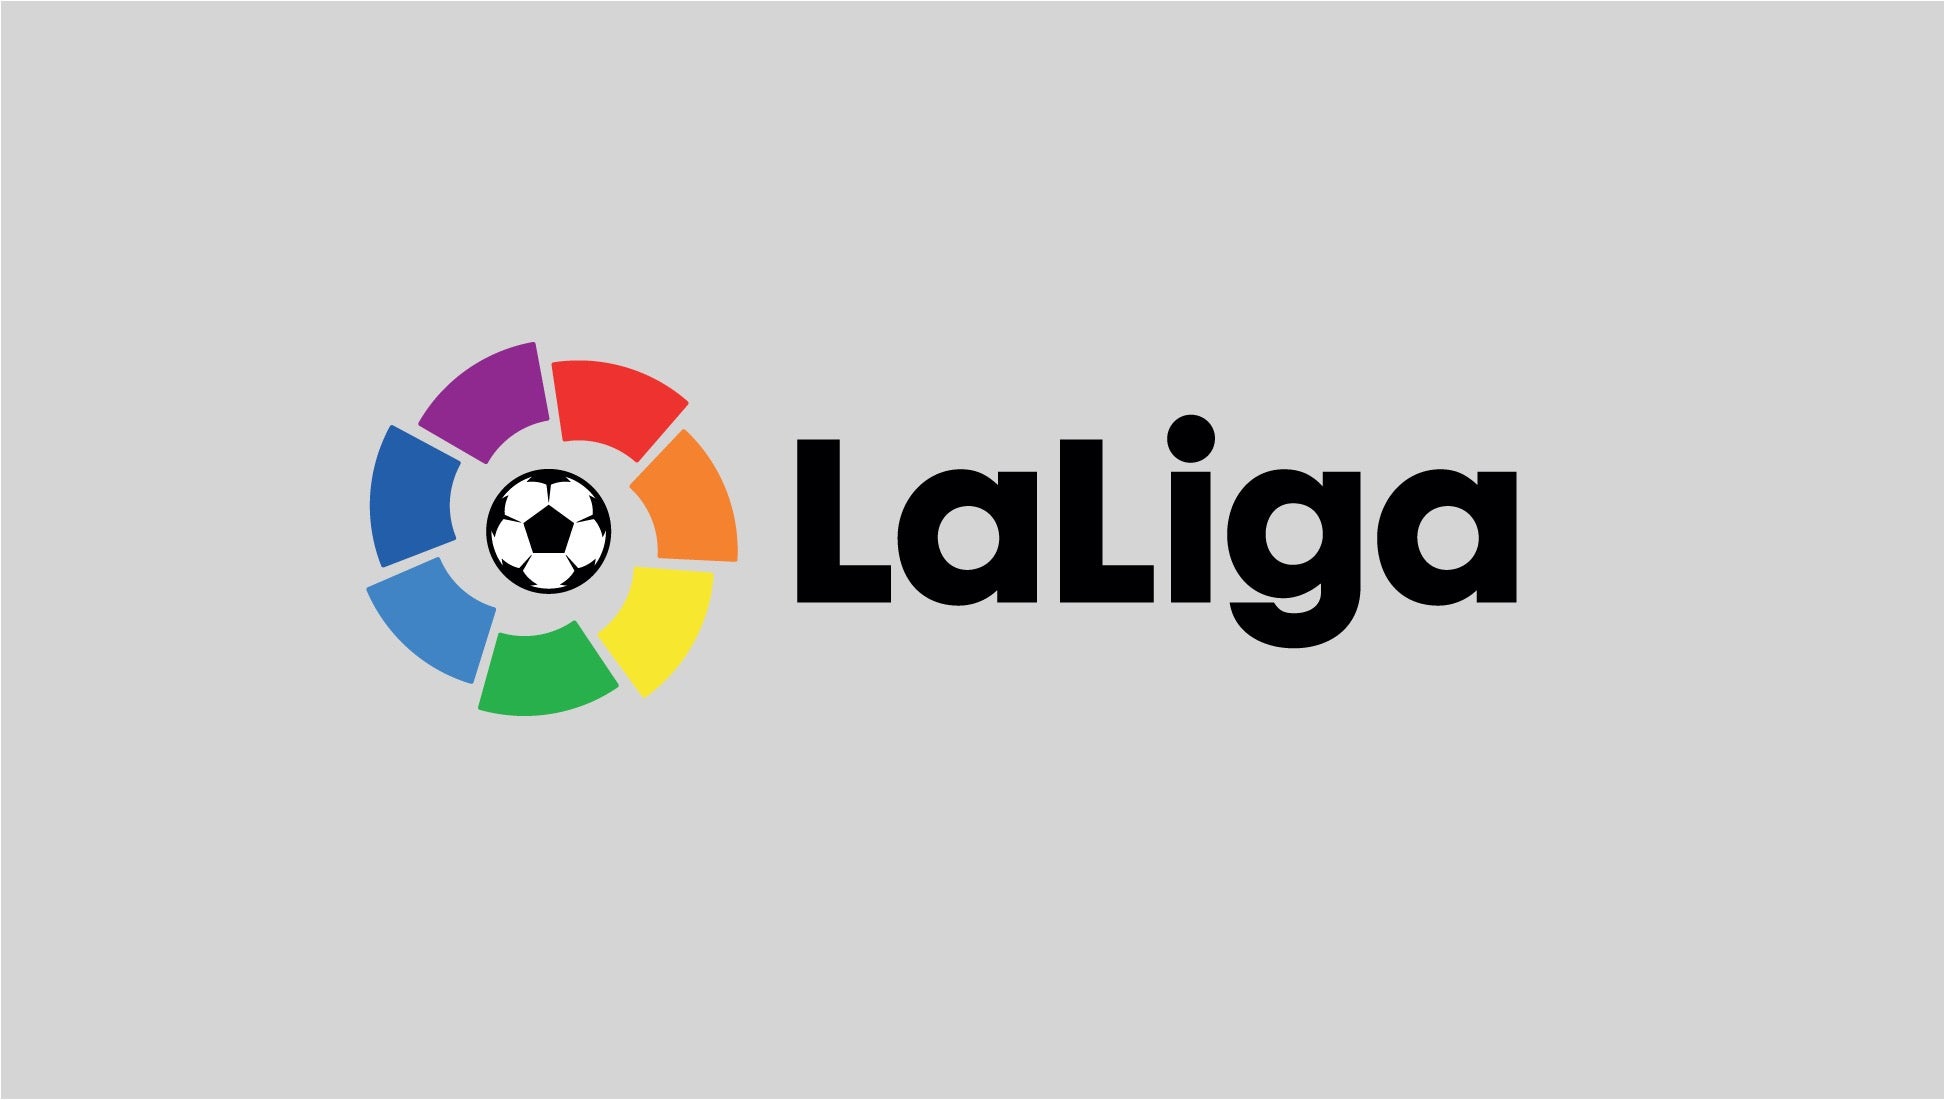 How to Watch LaLiga Live Without Cable